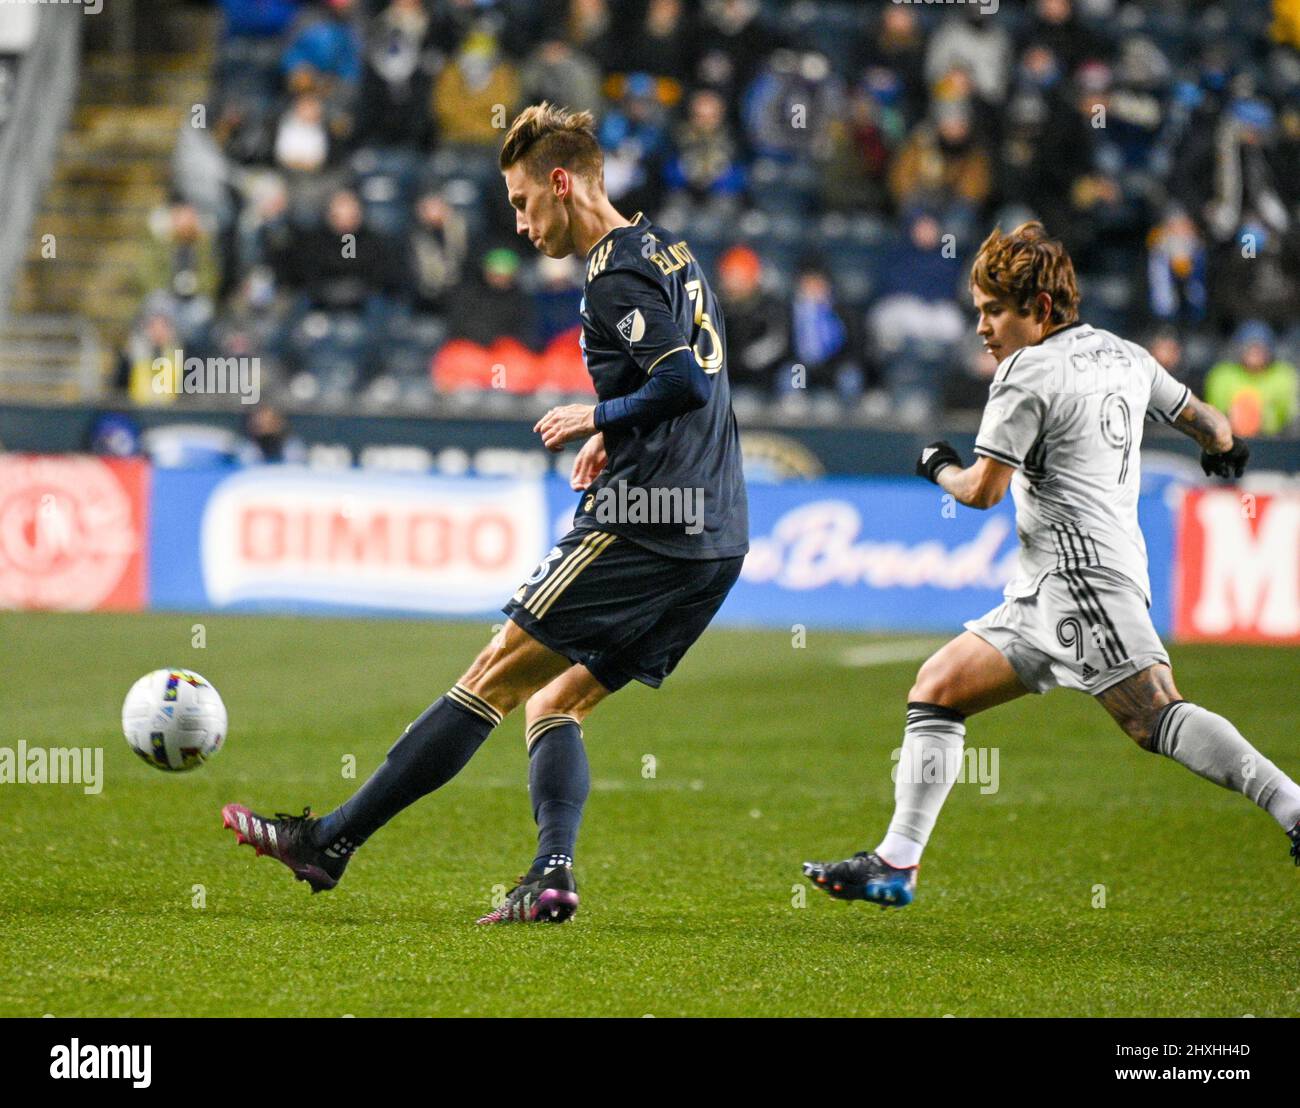 Chester, Pennsylvania, USA. 12th Mar, 2022. March 12, 2022, Chester PA- Philadelphia Union player, JACK ELLIOTT (3) fights for the ball with JAVIER LOPEZ (9) of the San Jose Earthquakes during the match at Subaru Park (Credit Image: © Ricky Fitchett/ZUMA Press Wire) Stock Photo